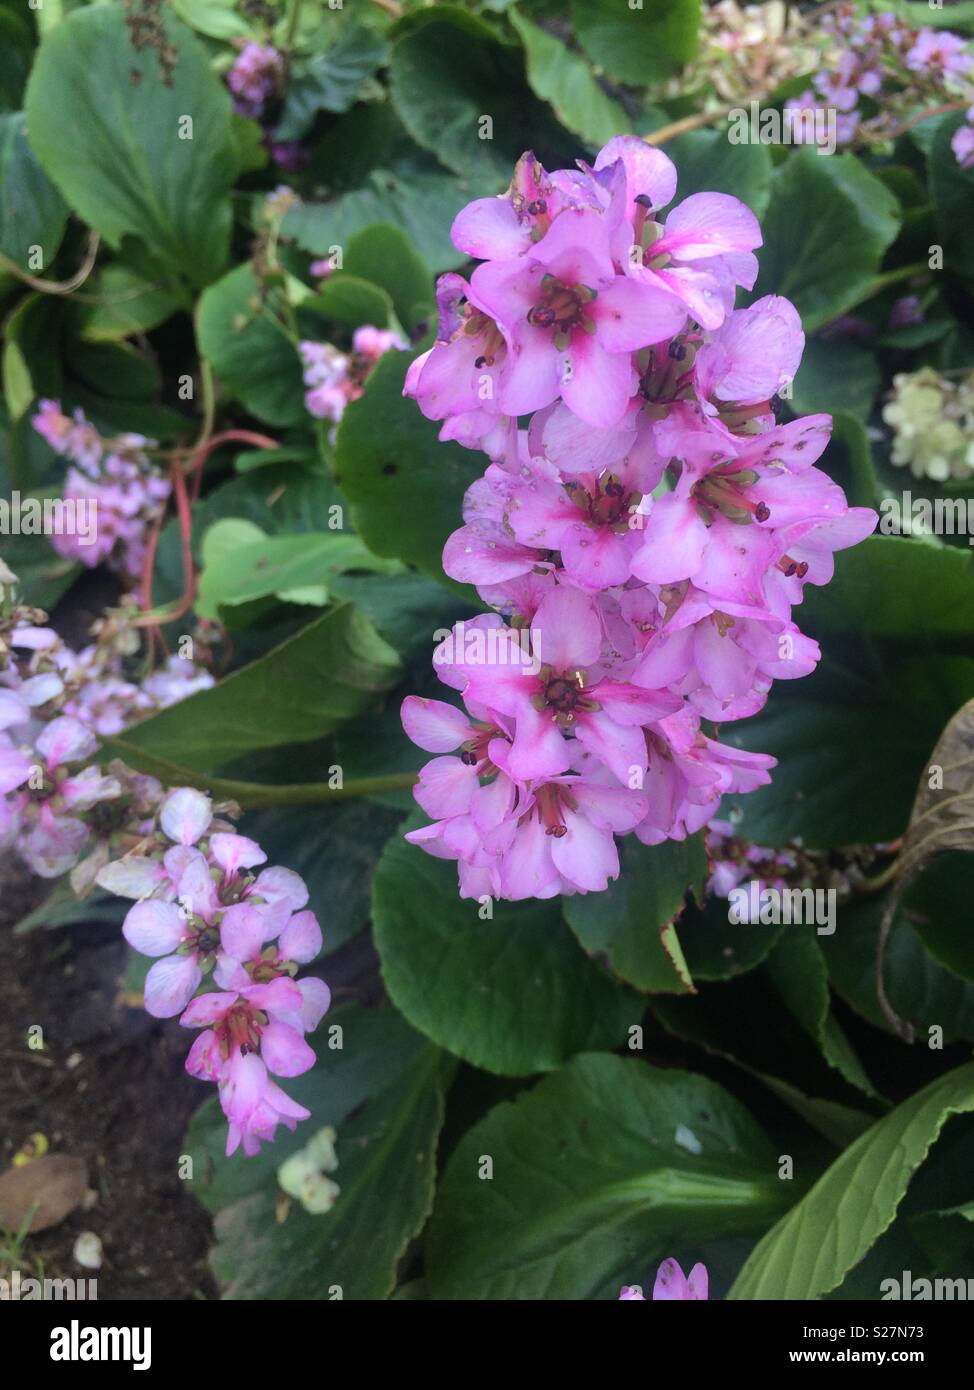 Pink Bergenia flowers on green plant in flower bed in garden Stock Photo